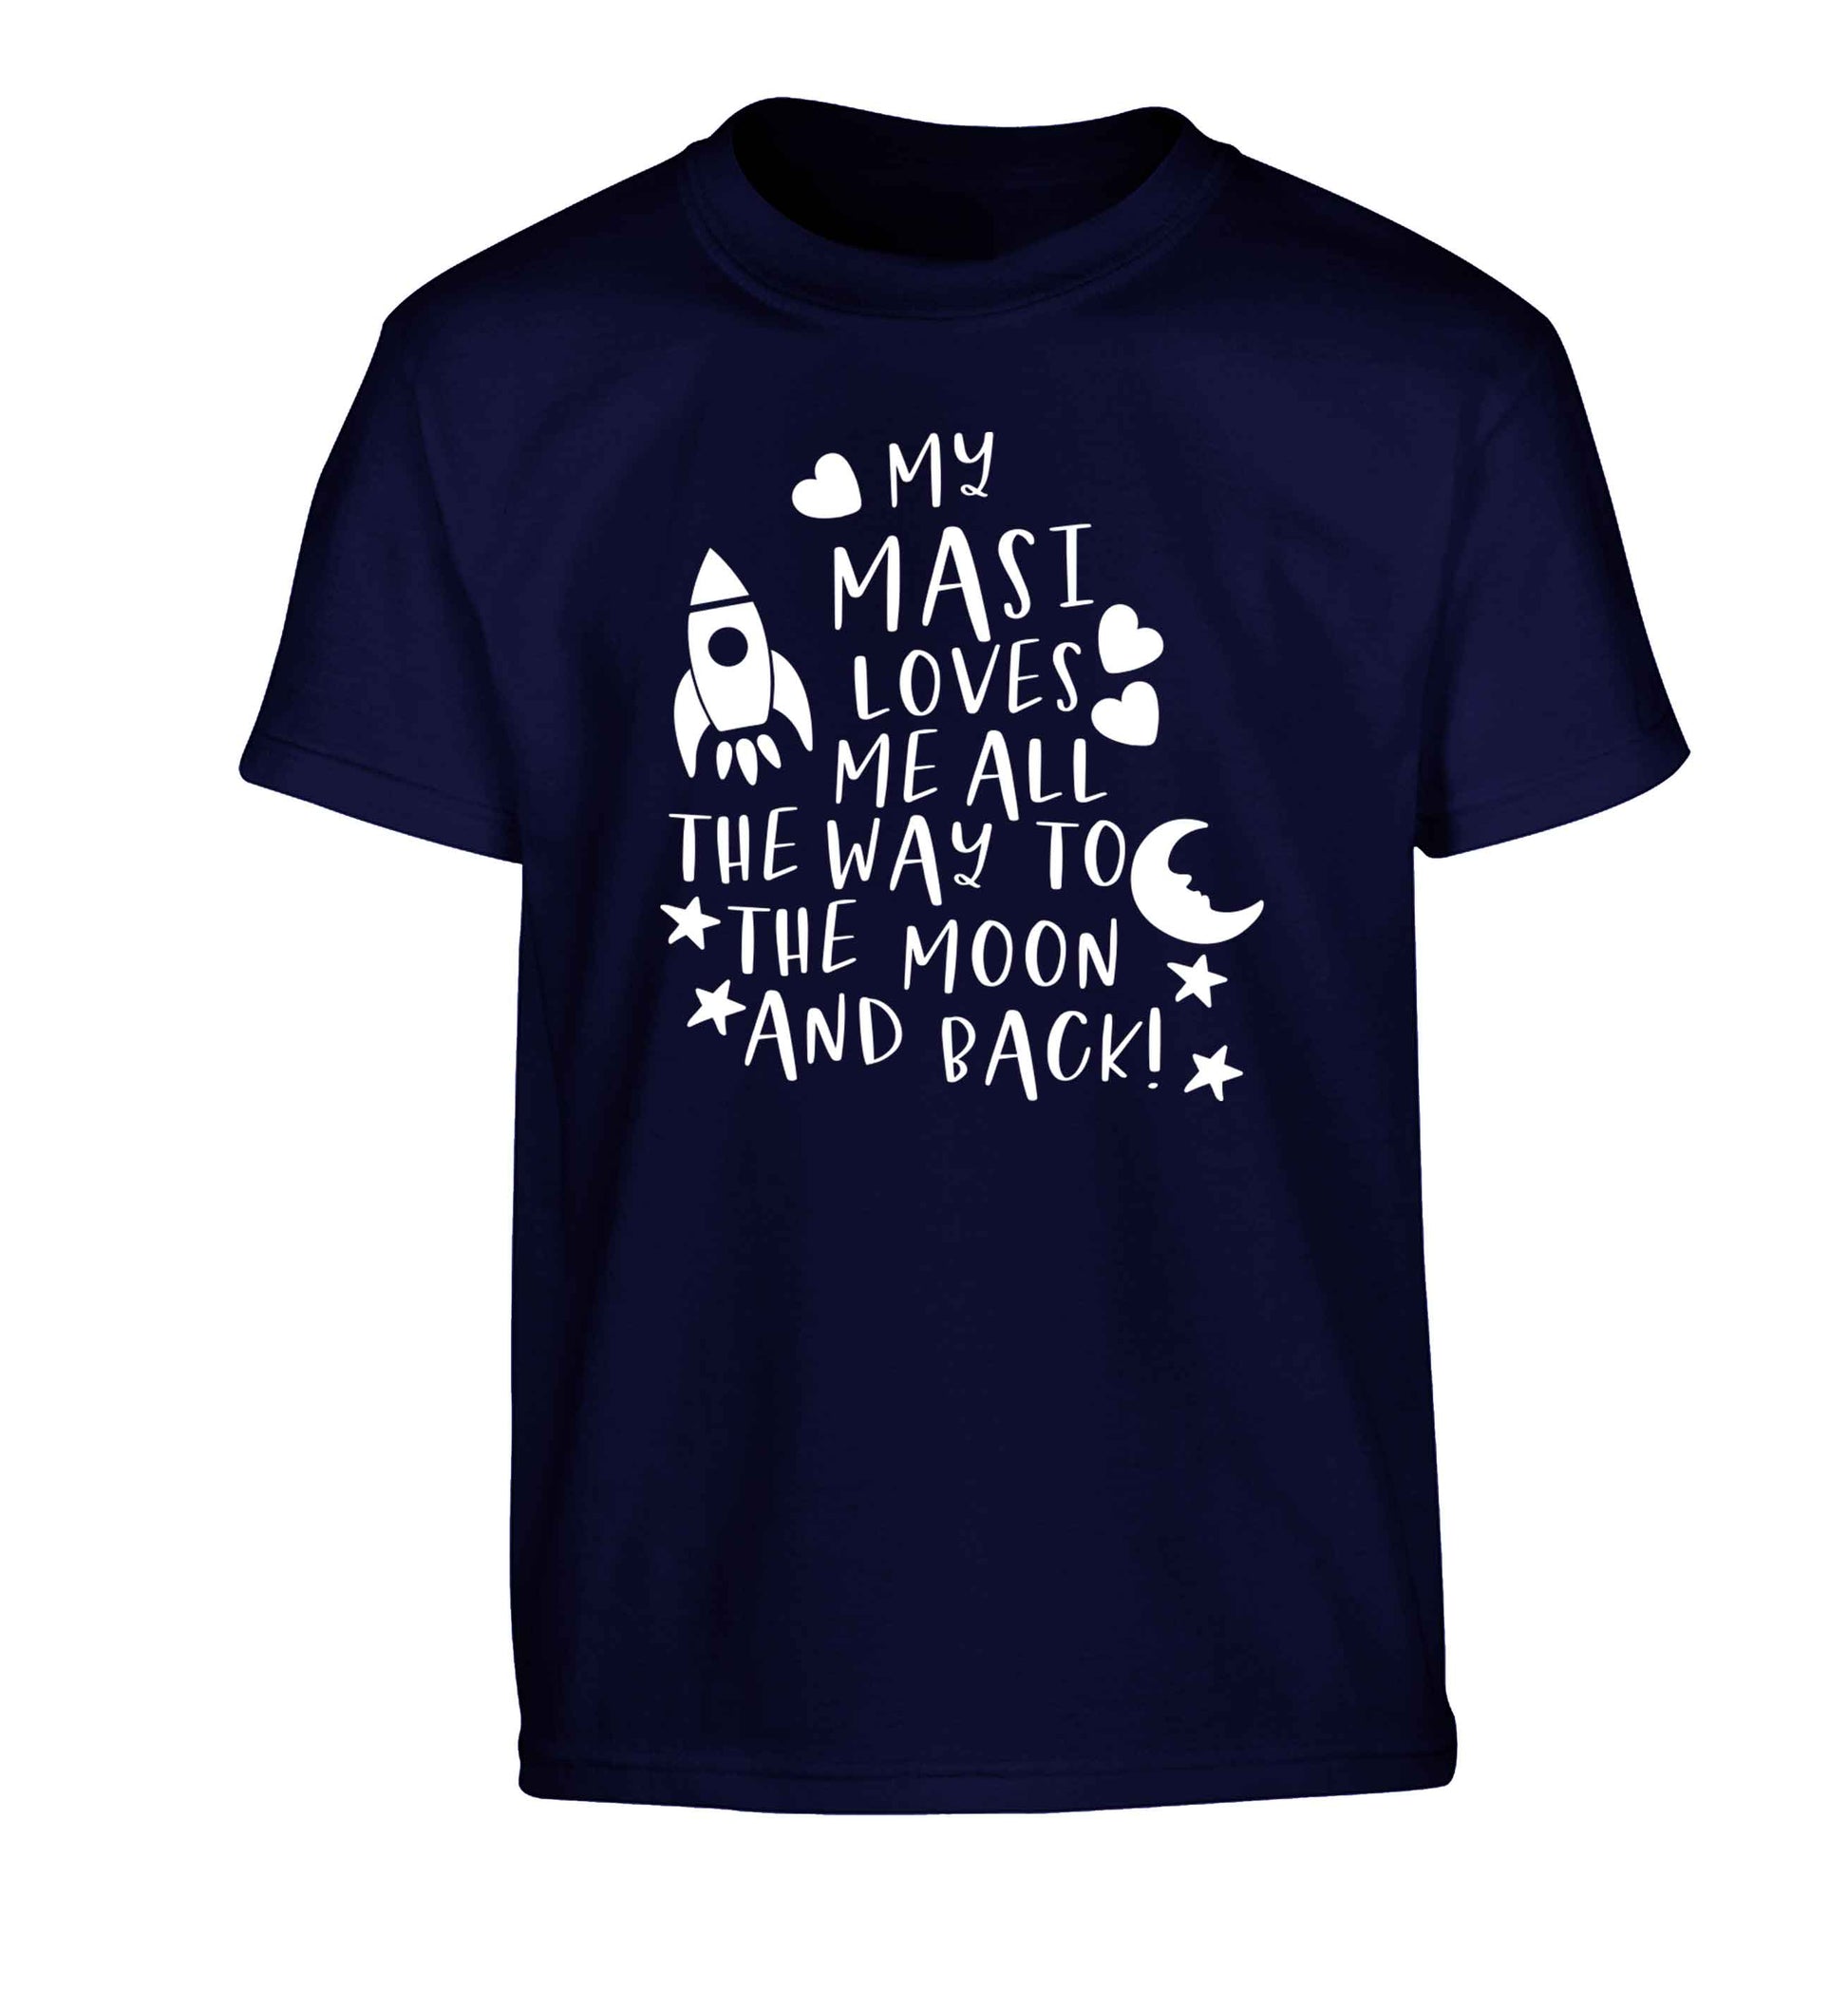 My masi loves me all the way to the moon and back Children's navy Tshirt 12-13 Years